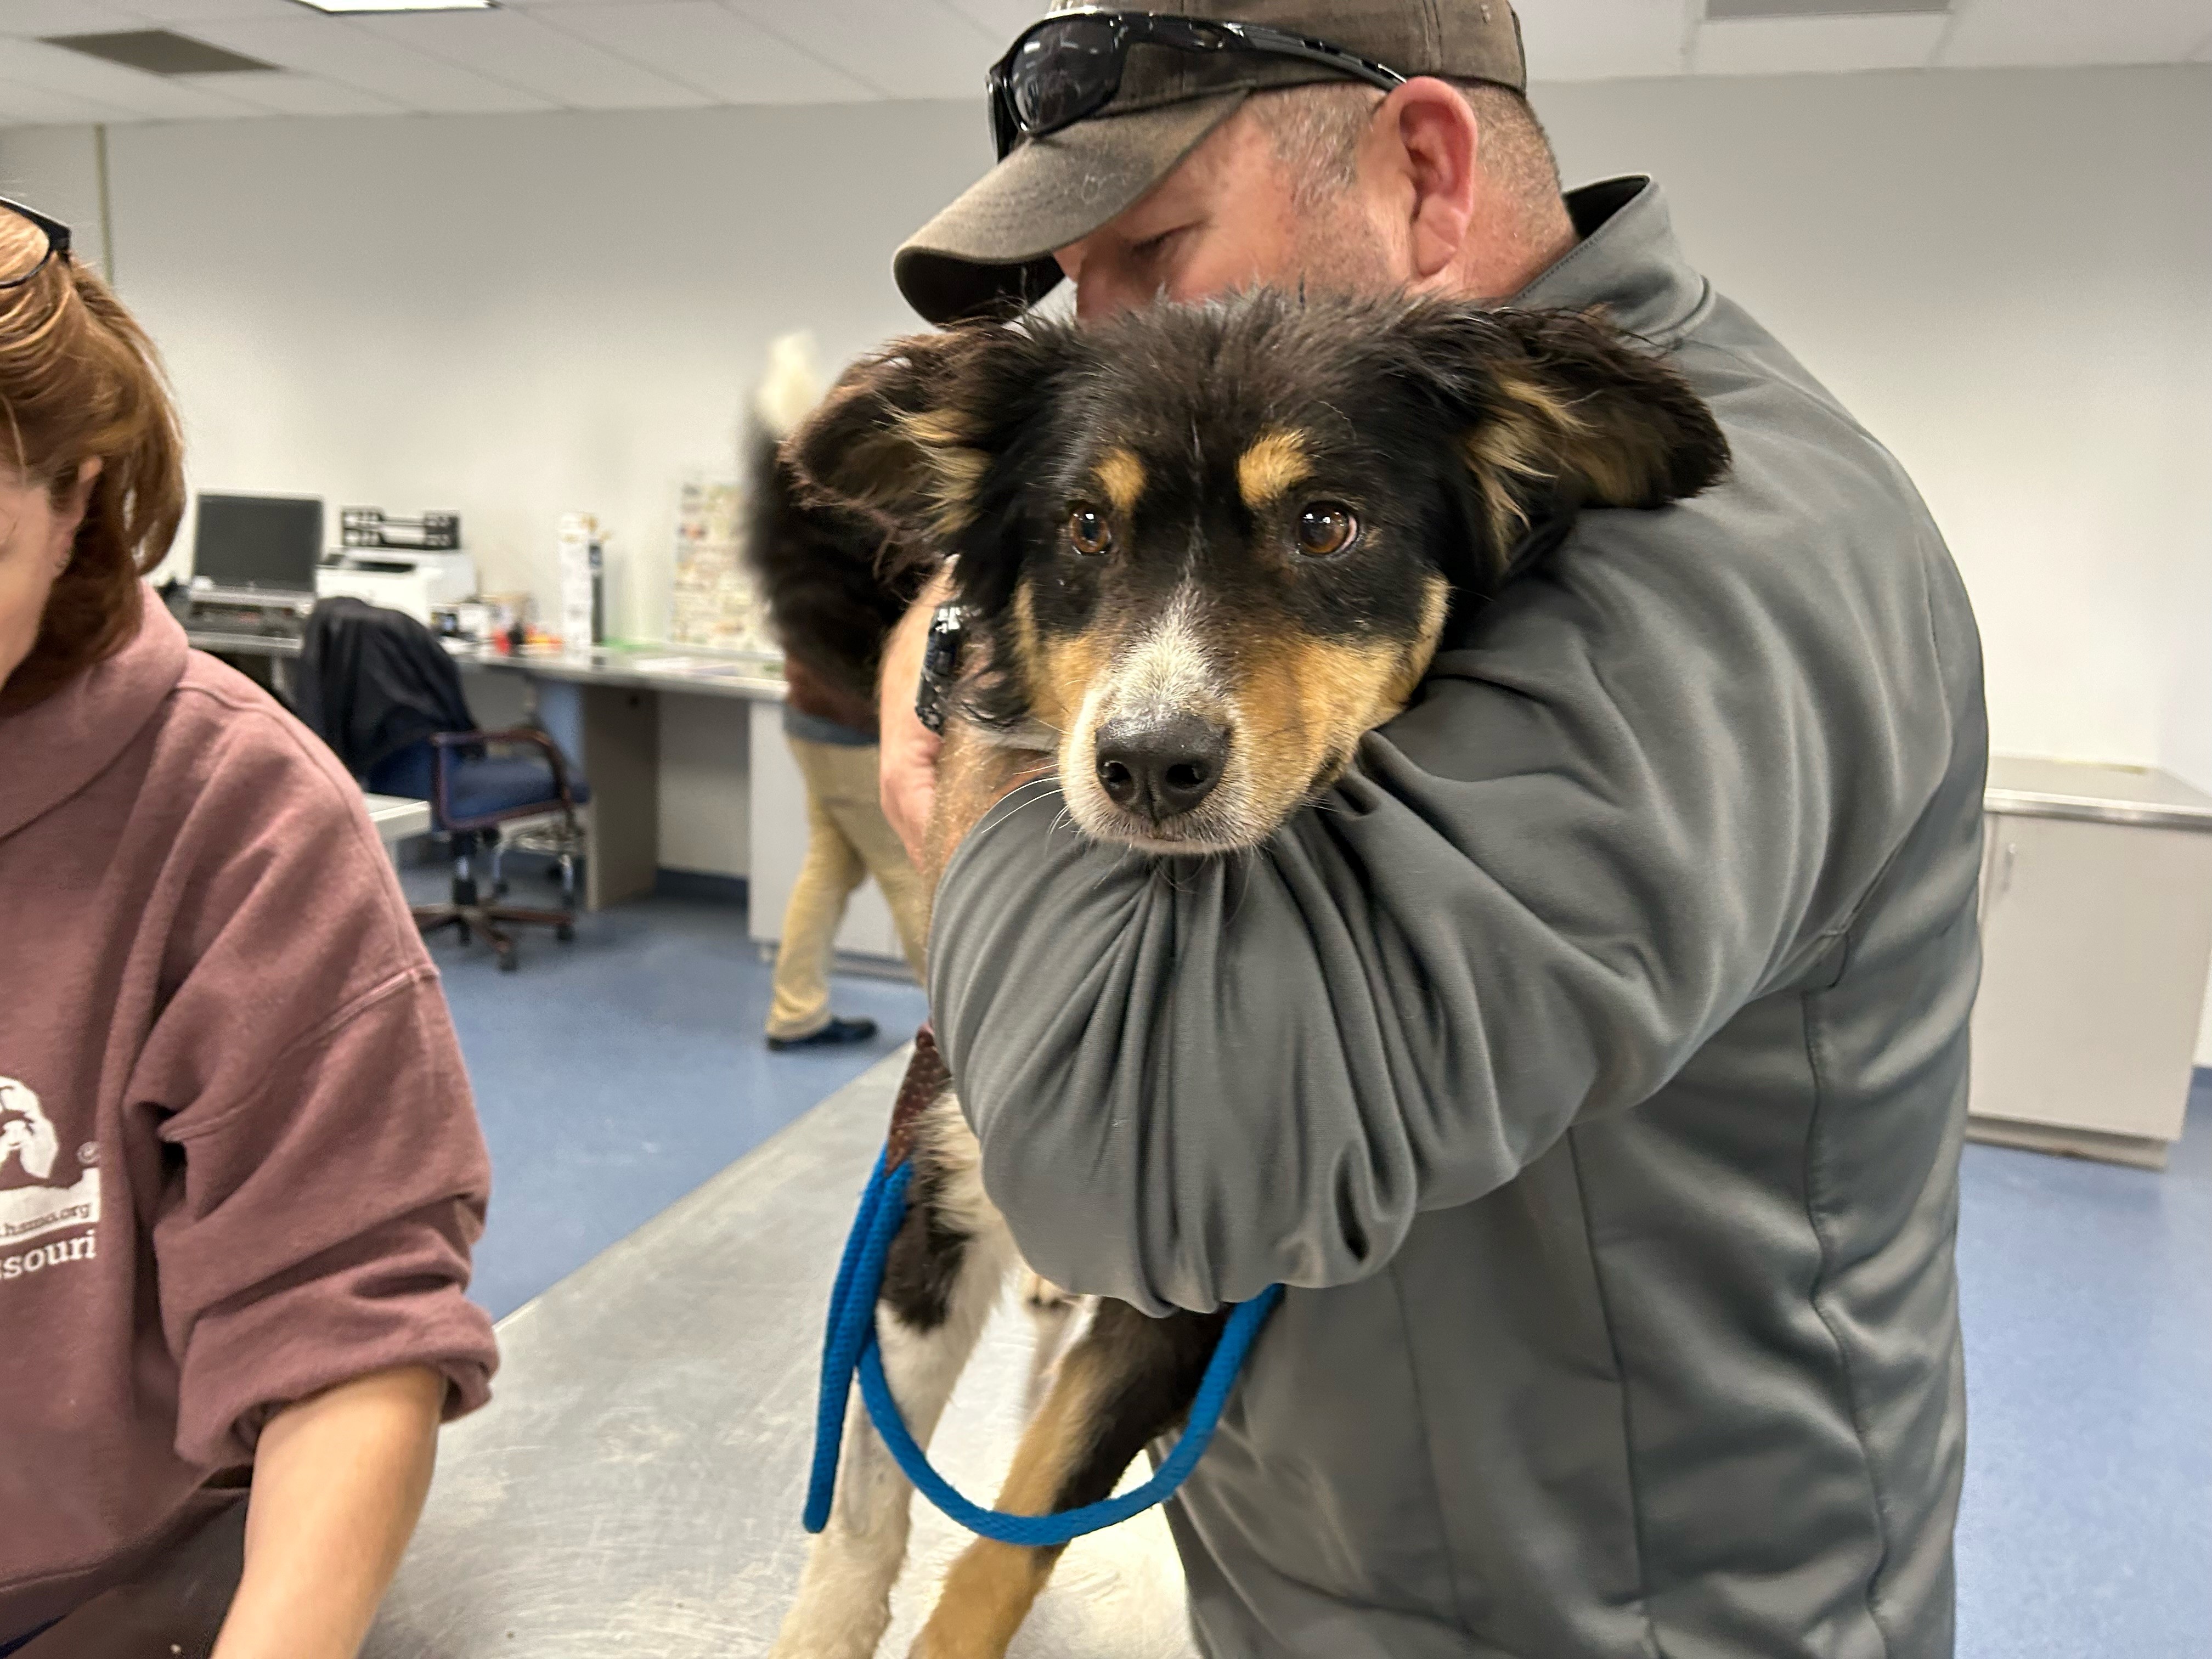 HSMO's Animal Cruelty Task Force brings 29 rescued dogs to St. Louis